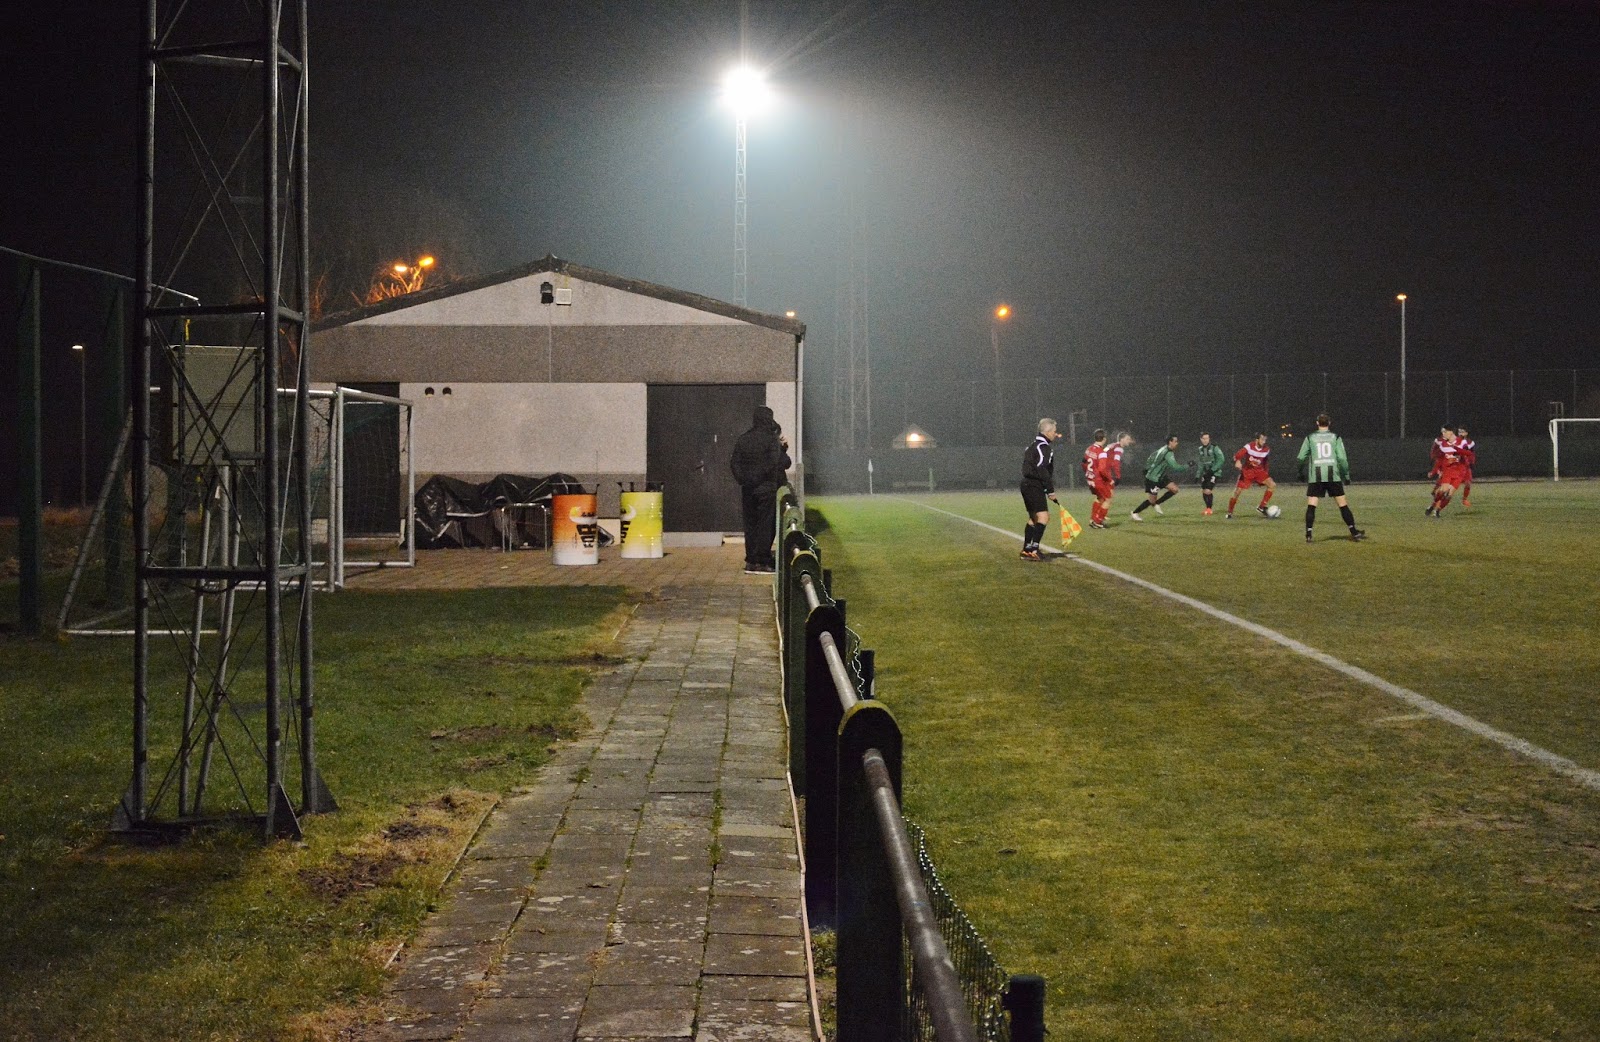 GROUND // Meirstraat - FC Oppuurs